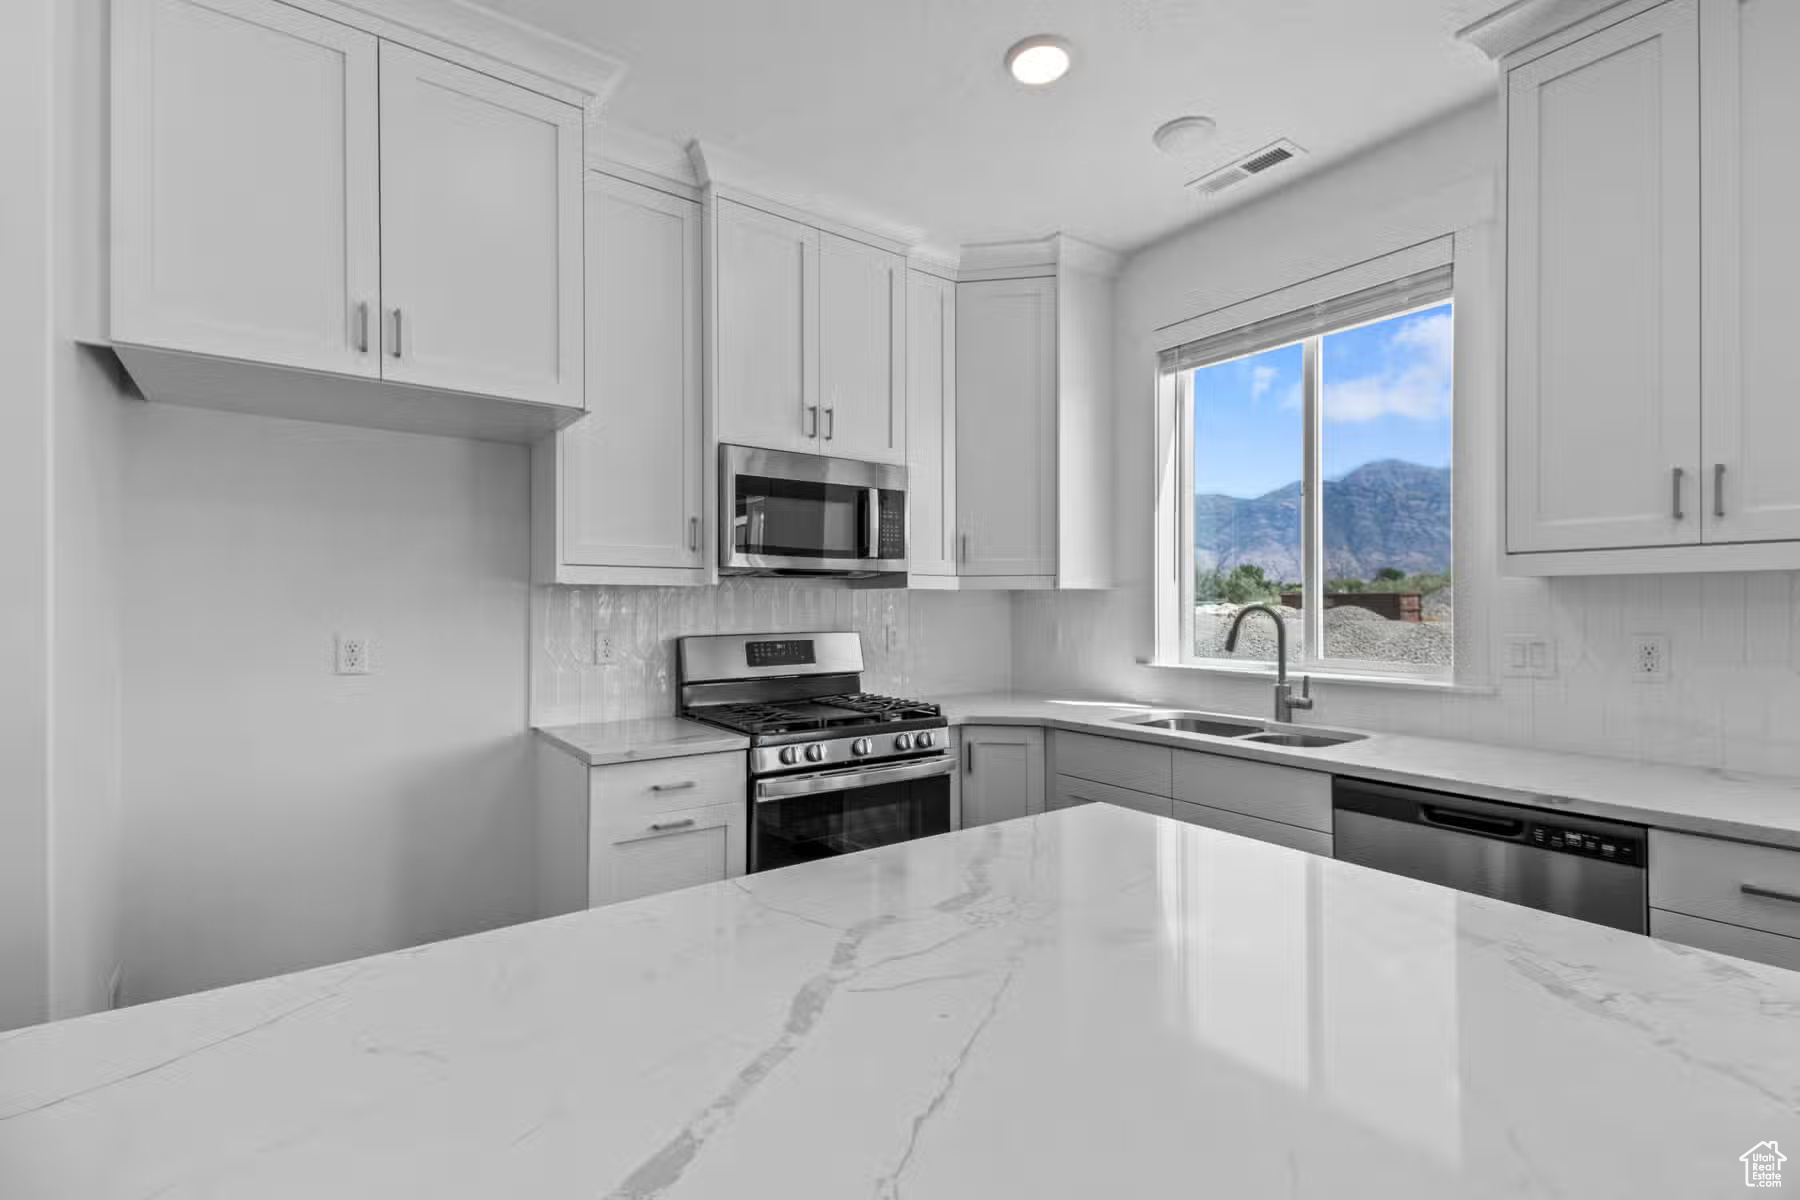 Kitchen featuring appliances with stainless steel finishes, white cabinets, sink, and light stone countertops